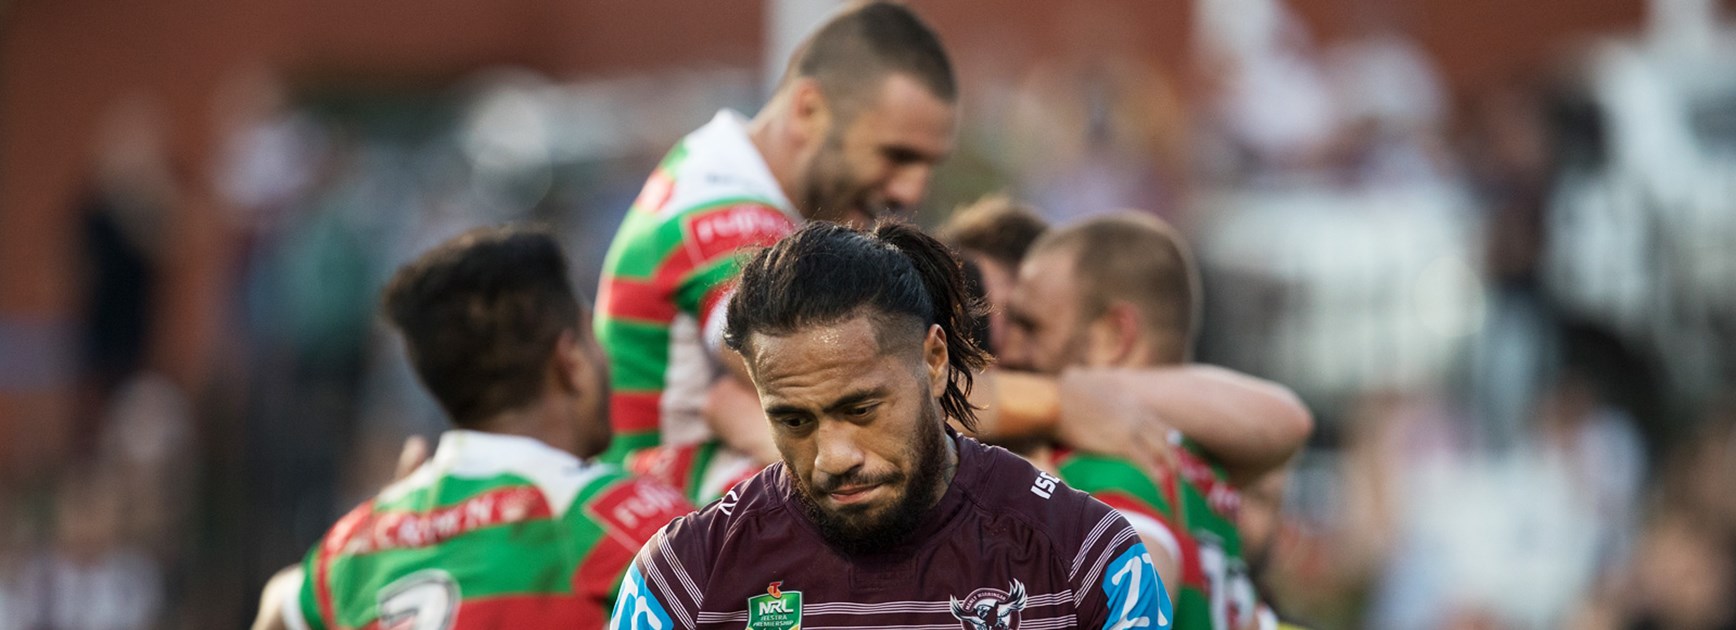 Manly's Jorge Taufua and celebrating Rabbitohs players.